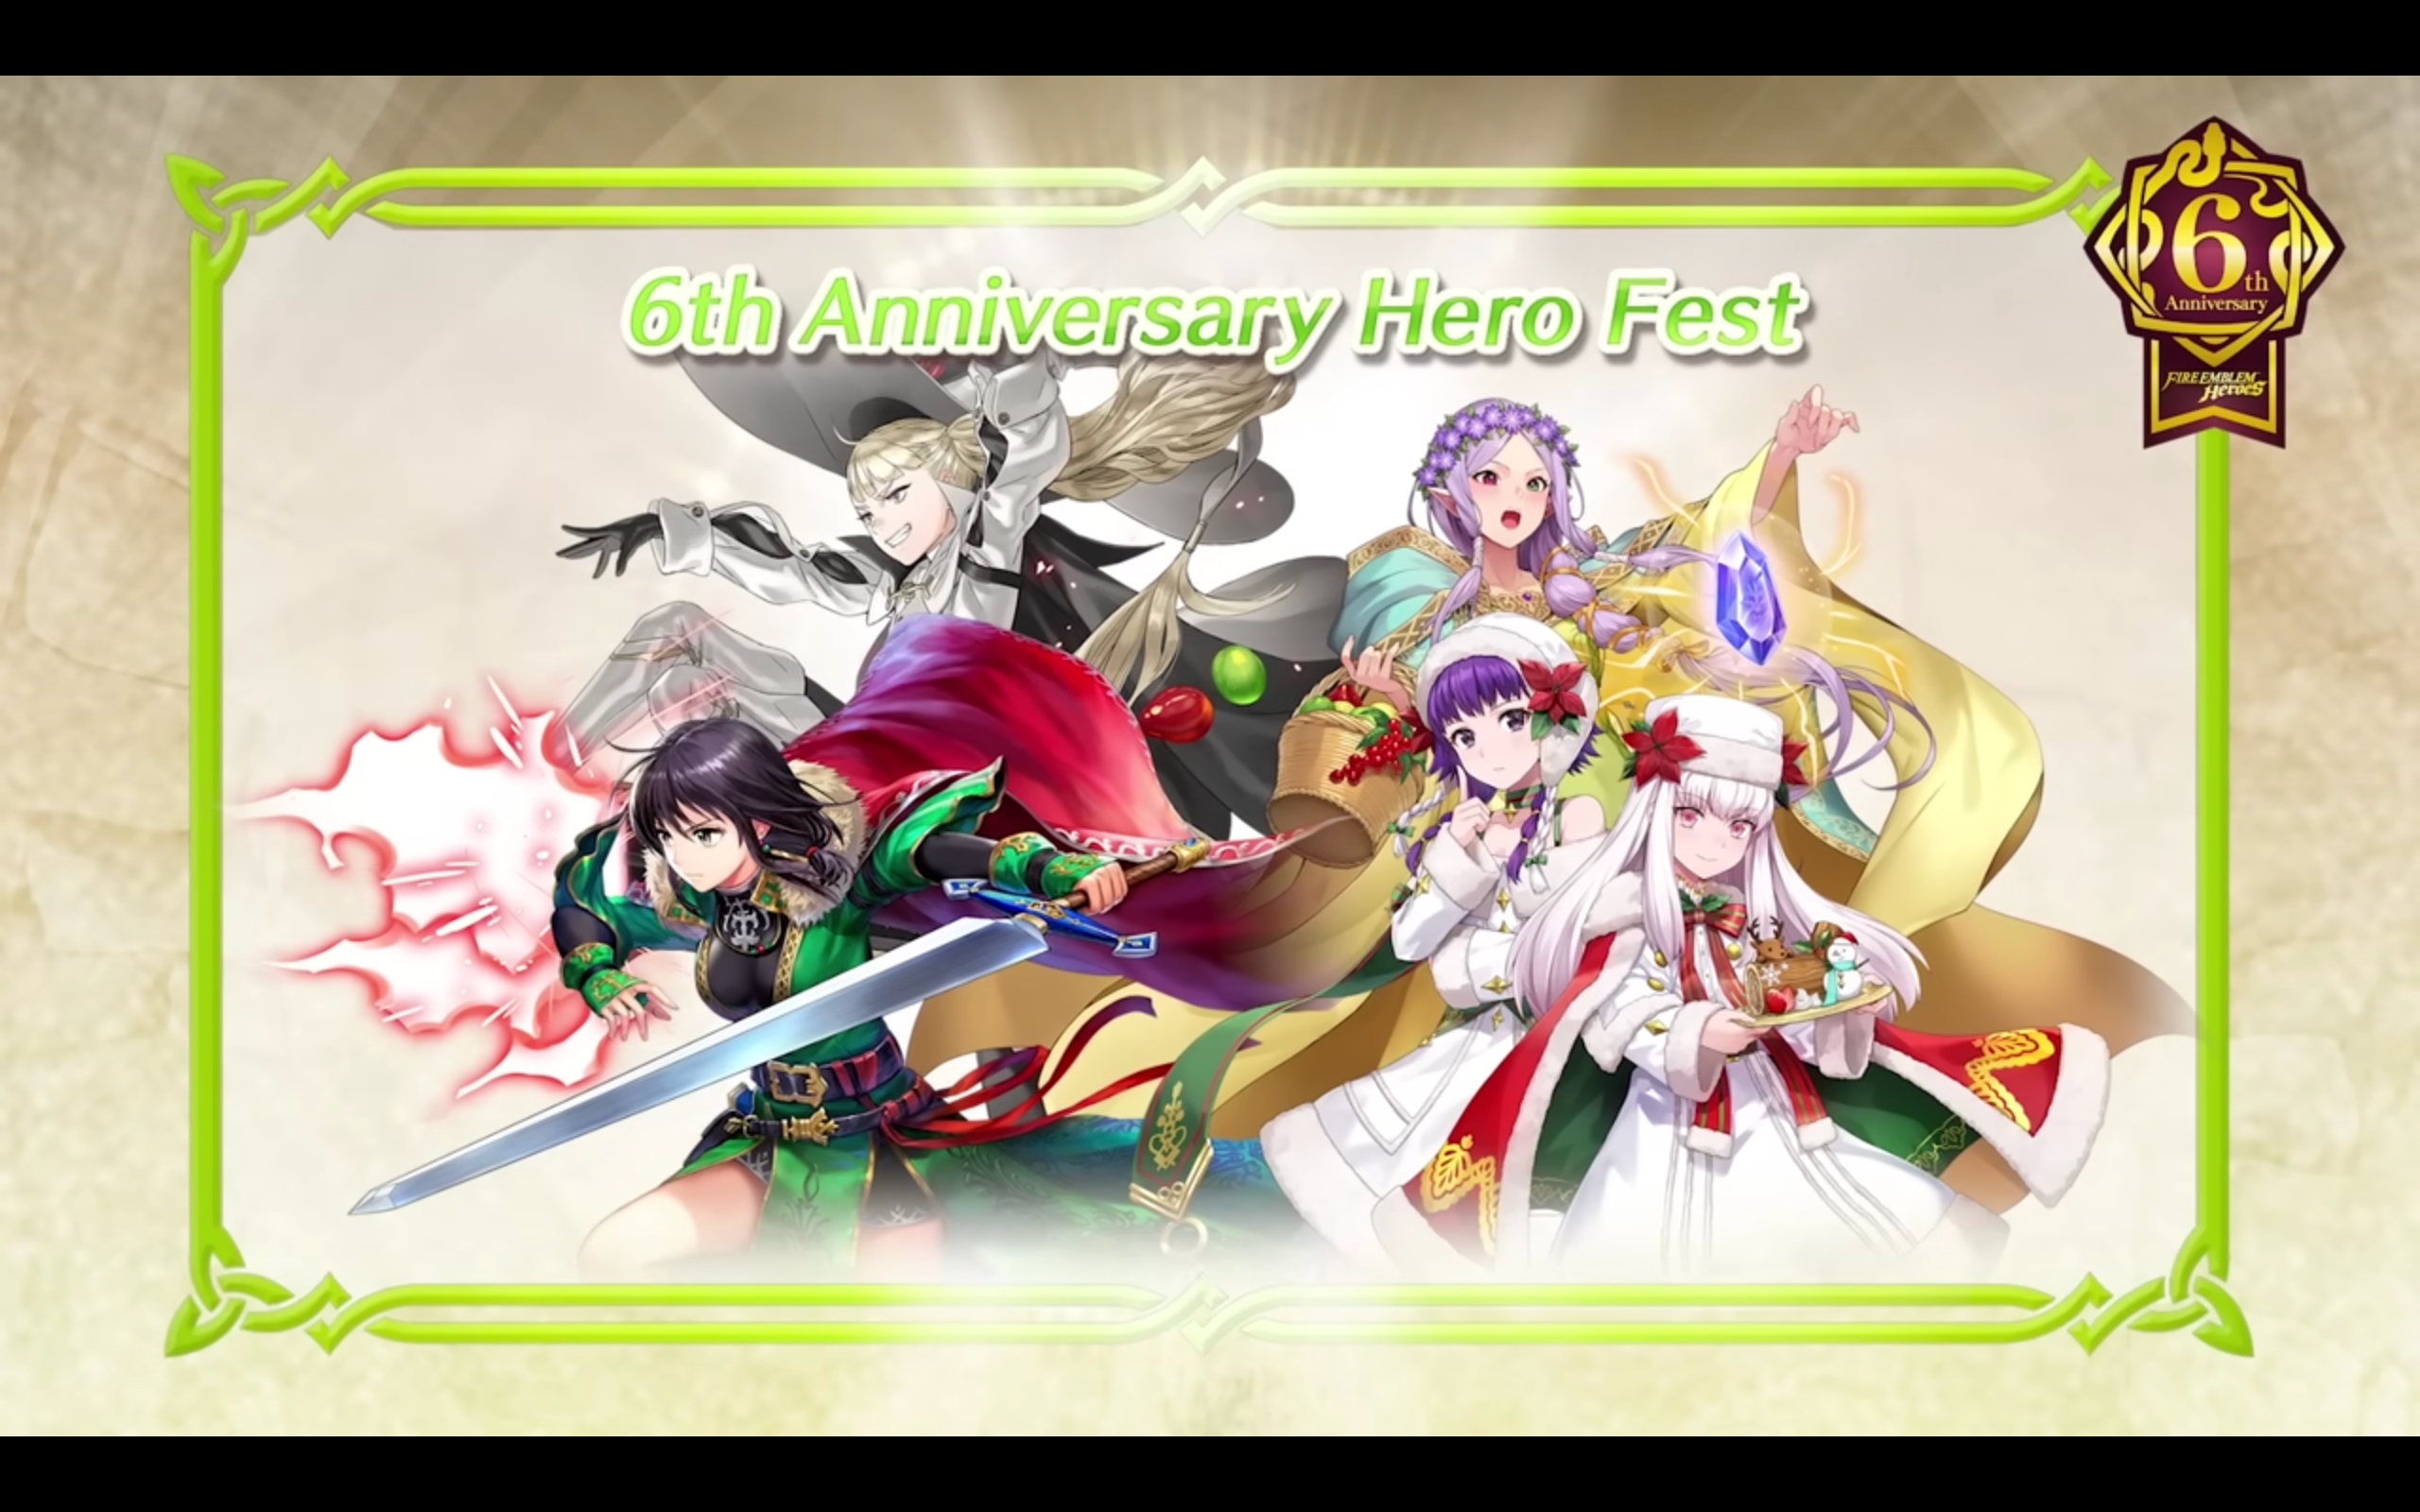 Fire Emblem Heroes 6th Anniversary Events Announced